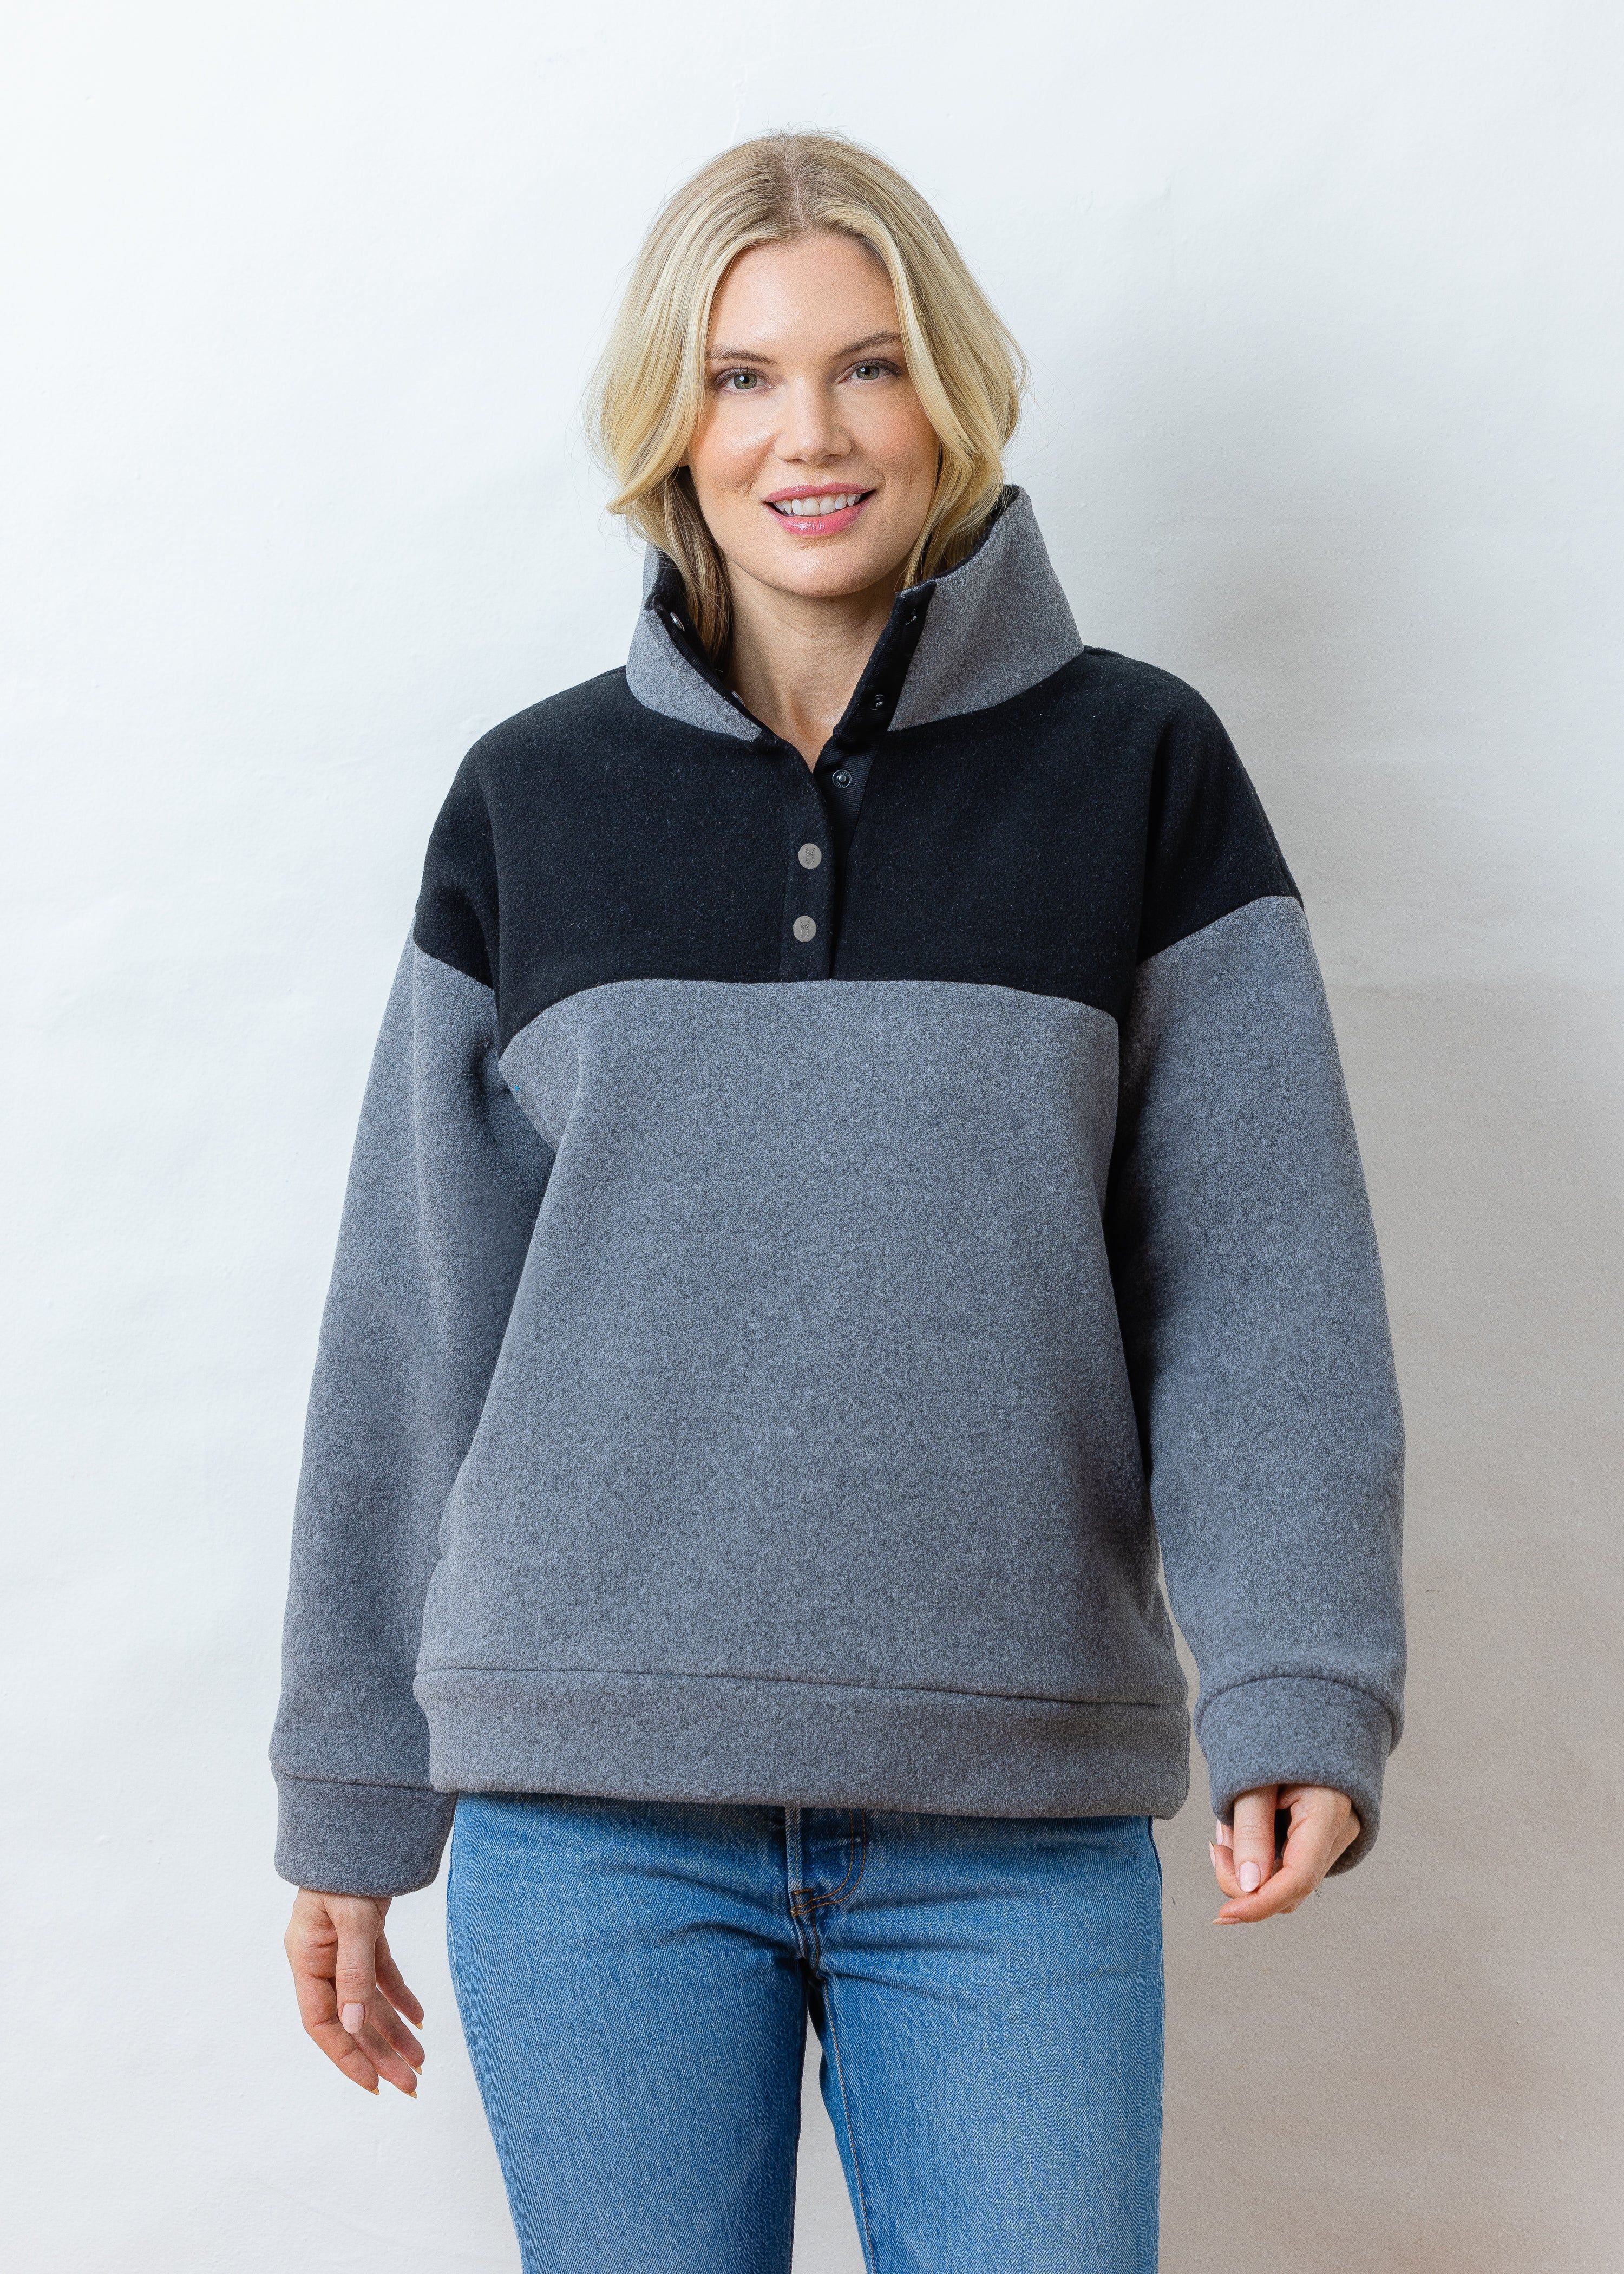 Driftaway Pullover in Double Layer Vello Fleece (Heather Grey / Black) | Dudley Stephens